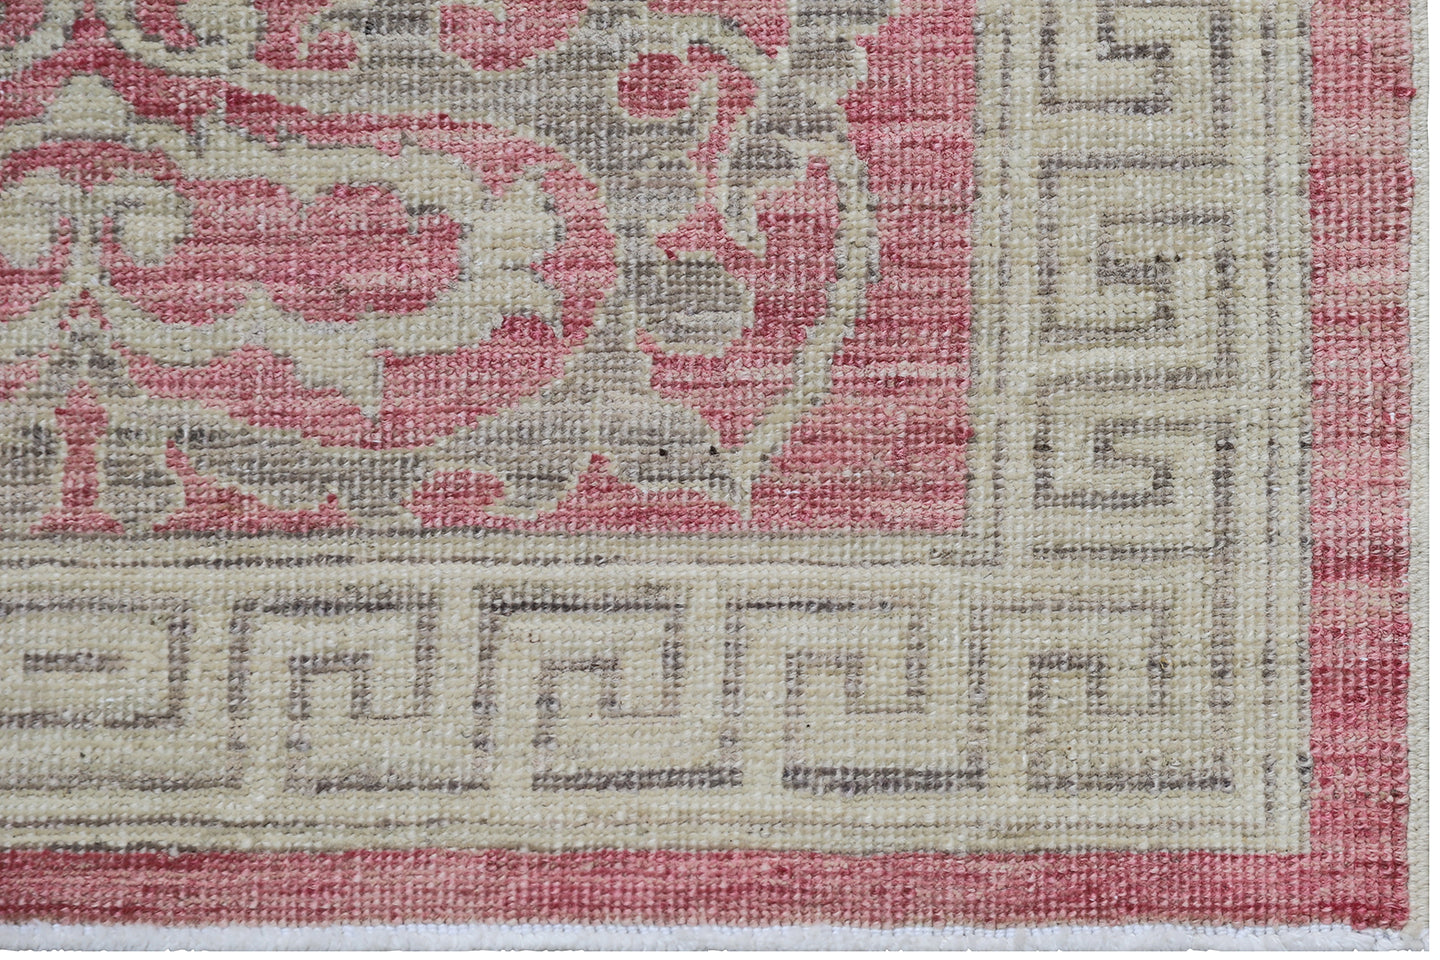 2'x2' Red White Spanish Design Ariana Transitional Collection Small Rug